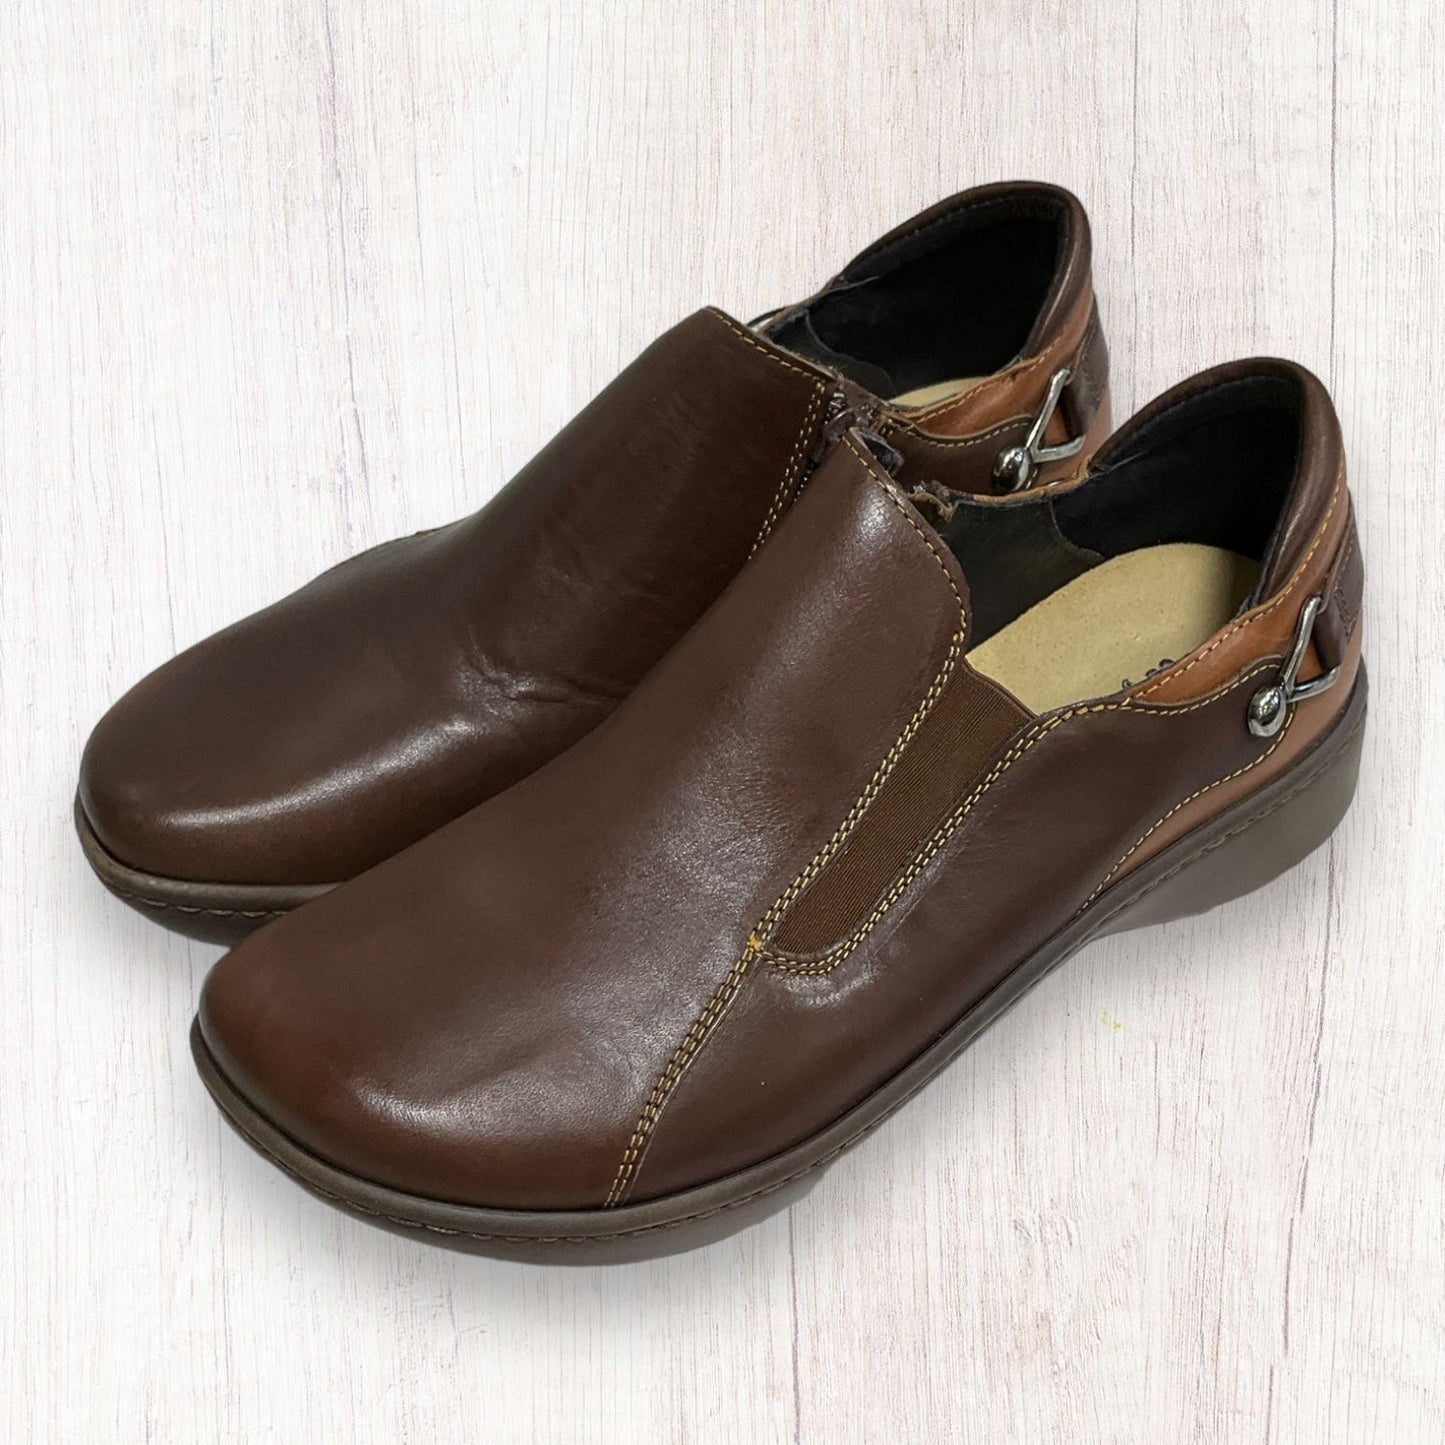 Brown Shoes Flats Naot, Size 8.5